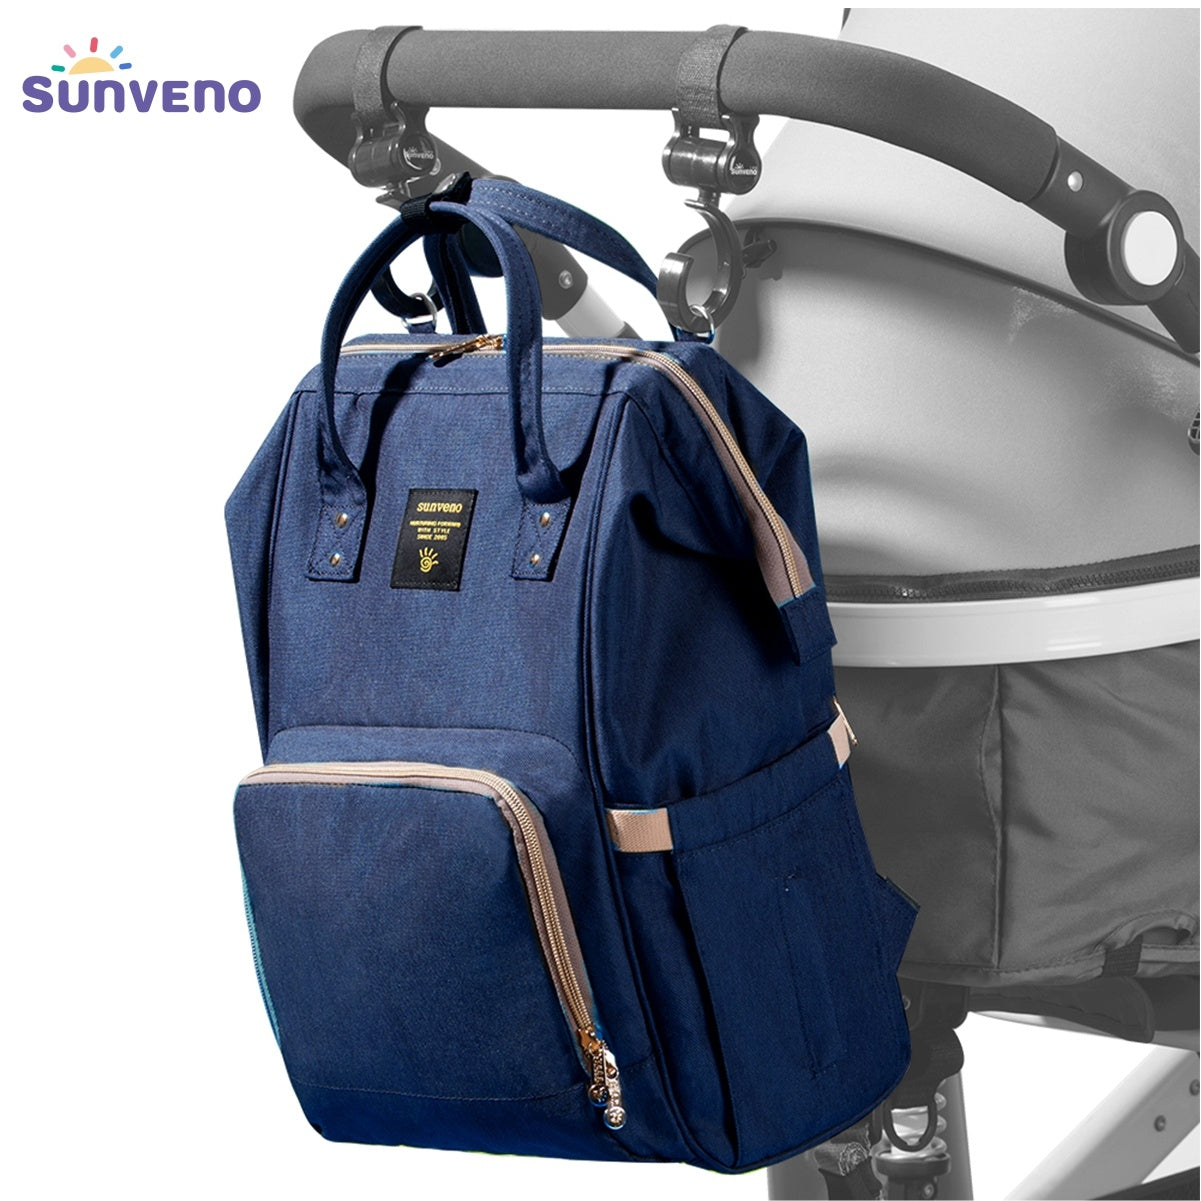 This Sunveno Original Diaper Bag Travel Baby Bags Navy Blue Mommy Backpack Organizer Nappy Maternity Bag Mother Kids, with gold zippers, features an external USB charging port connected to a smartphone for convenient on-the-go charging. Perfect for those who value both style and functionality in their accessories.